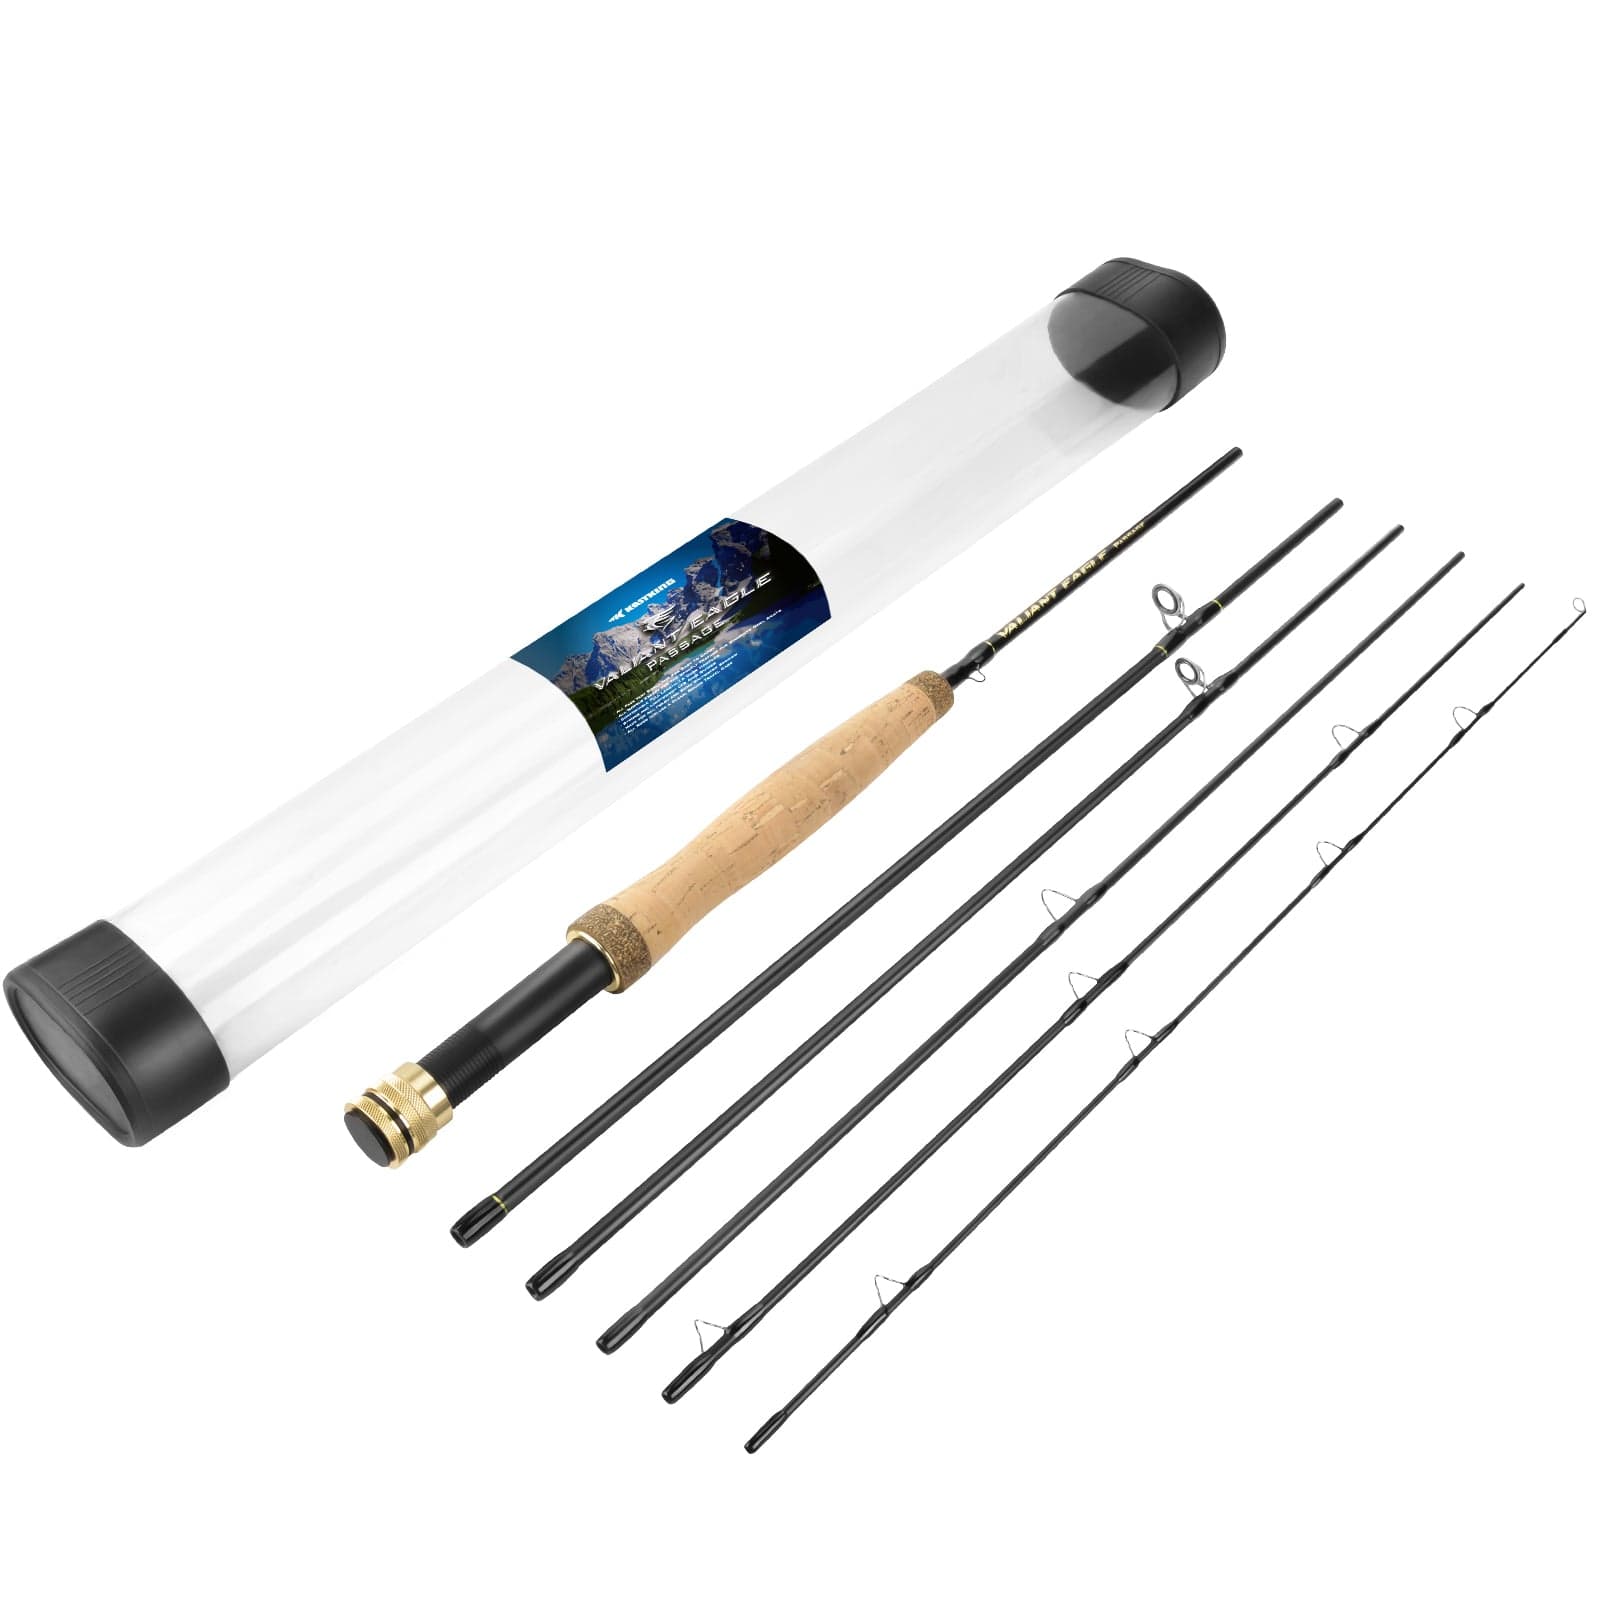 Adventure-Ready: Travel Fishing Rods For On-the-Go Angling!